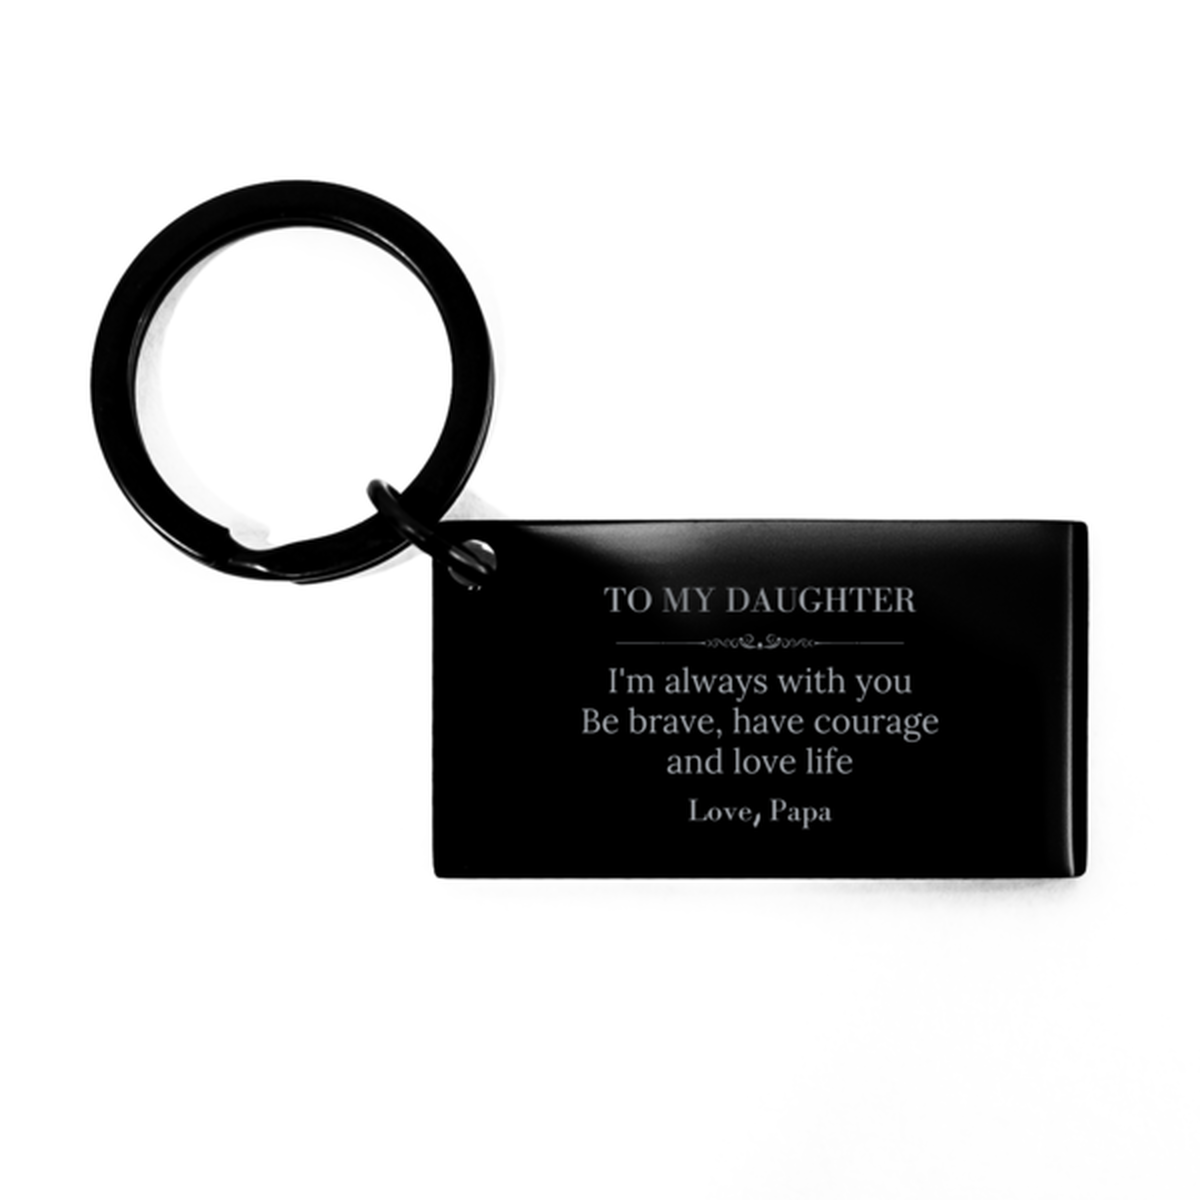 To My Daughter Gifts from Papa, Unique Keychain Inspirational Christmas Birthday Graduation Gifts for Daughter I'm always with you. Be brave, have courage and love life. Love, Papa